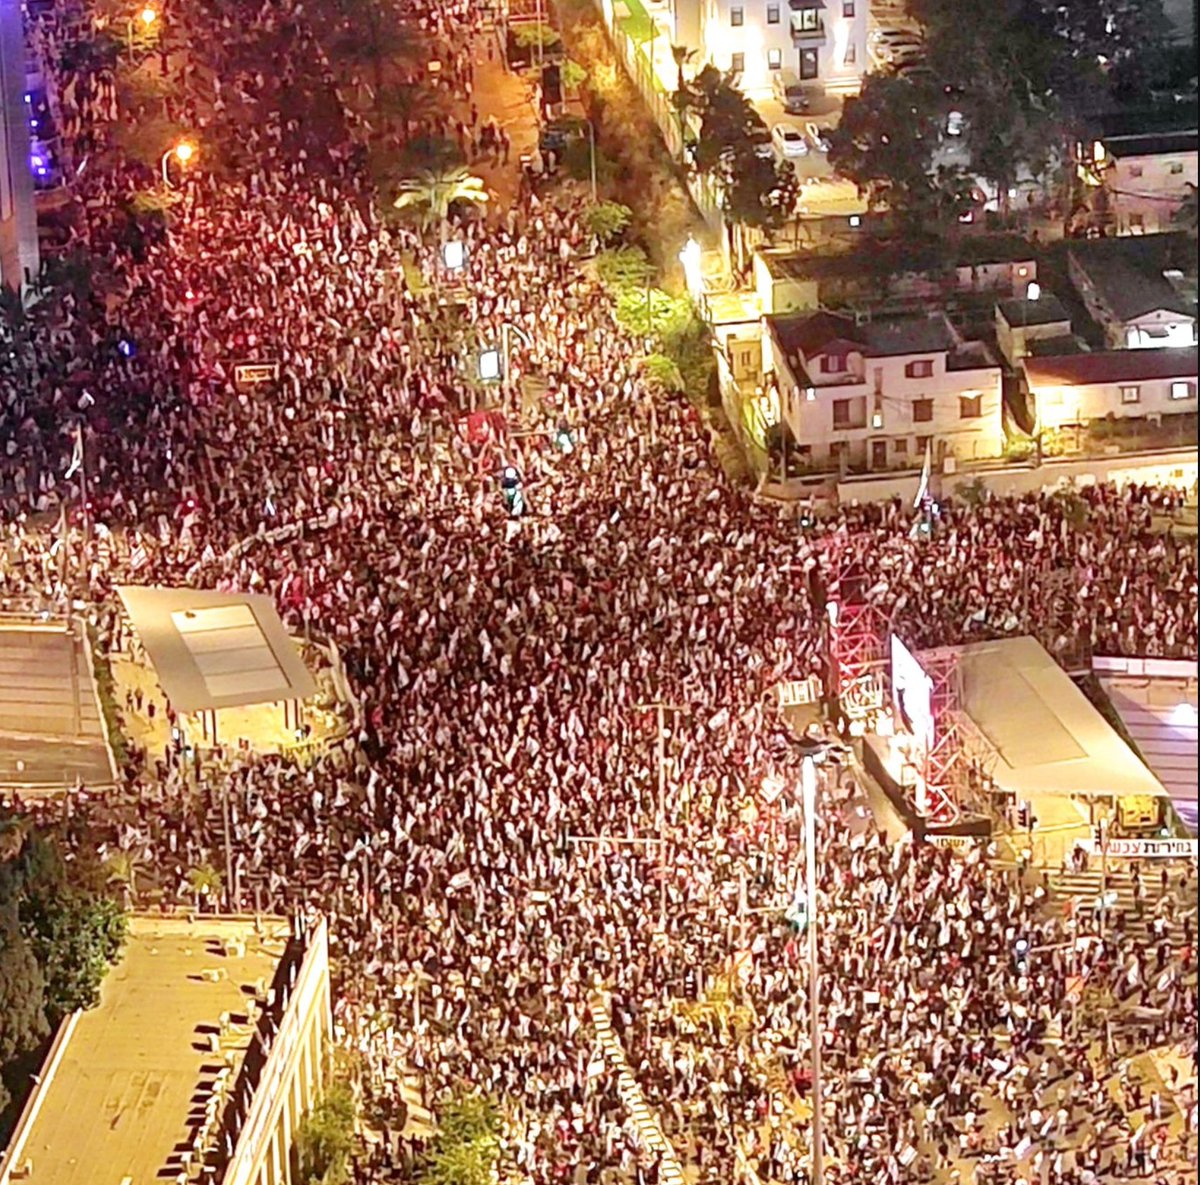 Tel Aviv, Saturday night. Elections now! Special edition for those who said that people would not come out again after the Iranian attack.